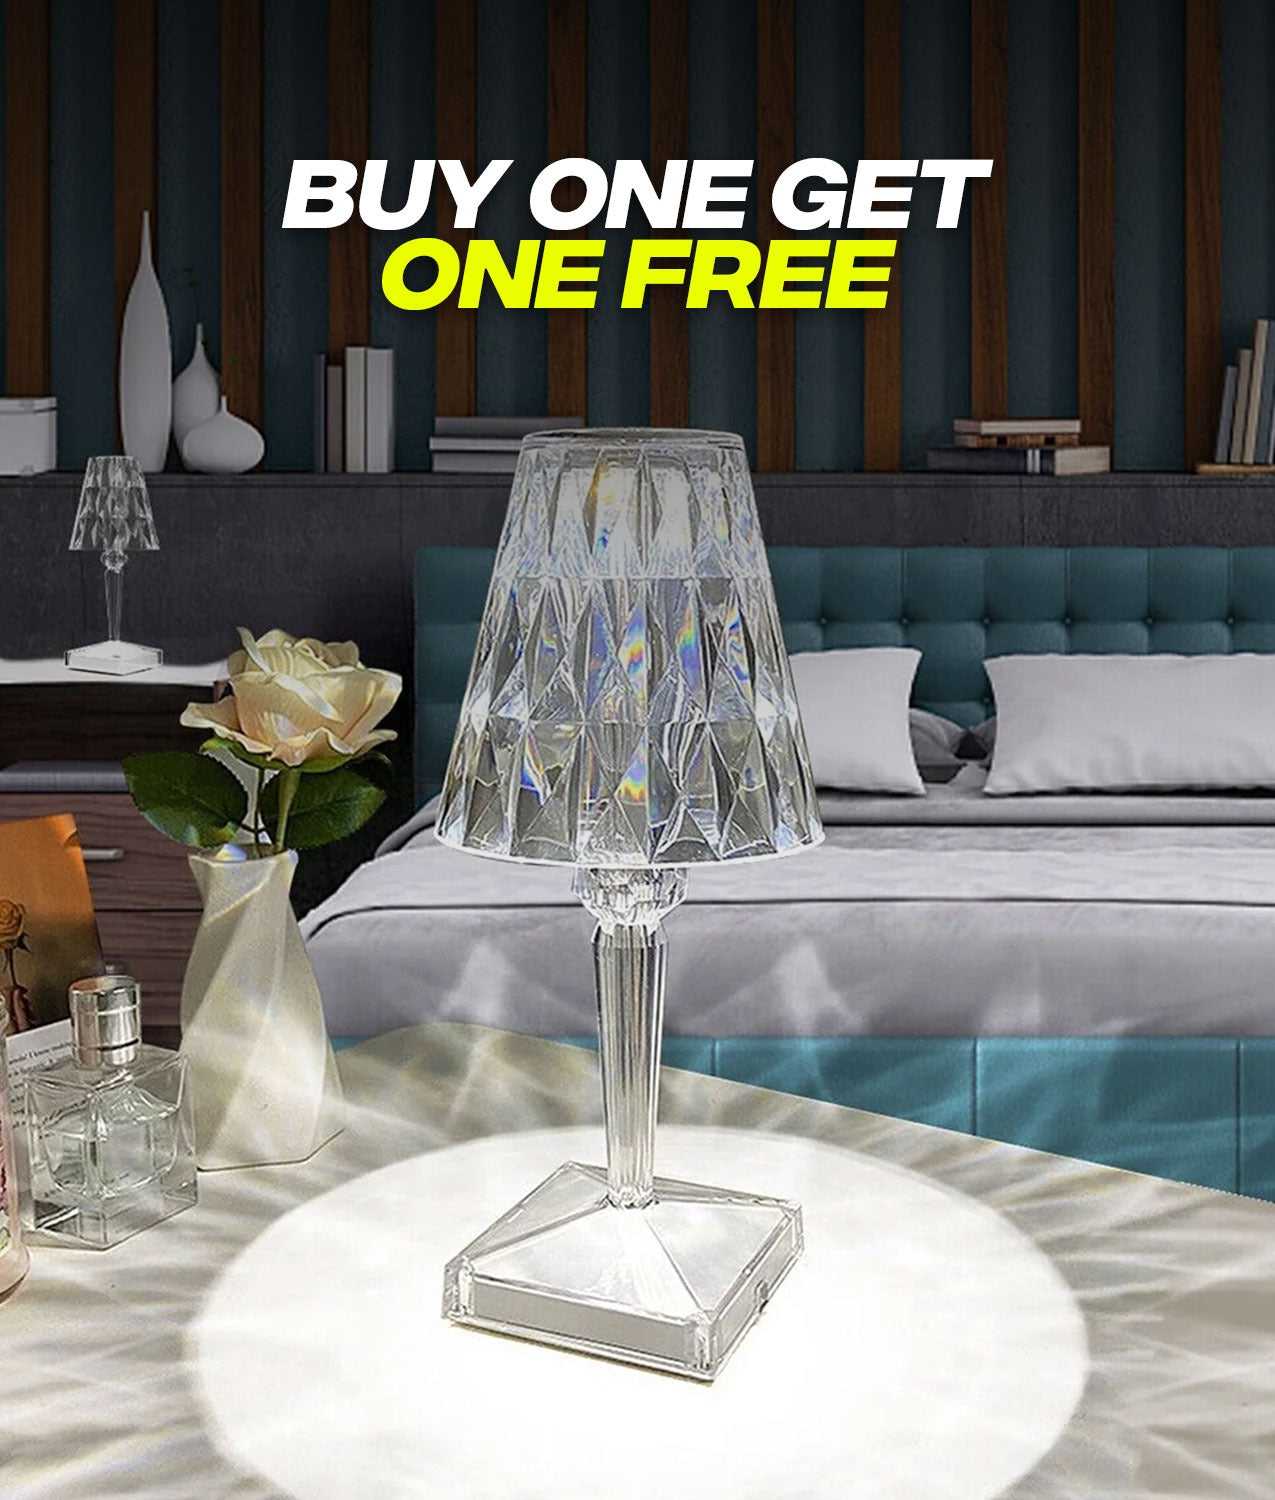 Buy 1 Get 1 Free Rechargeable Acrylic Diamond Nightstand Lamp Cordless , 3-Way Dimmable Color, Touch Control & Elegant Lamp Shade - BUY 1 GET 1 ONE